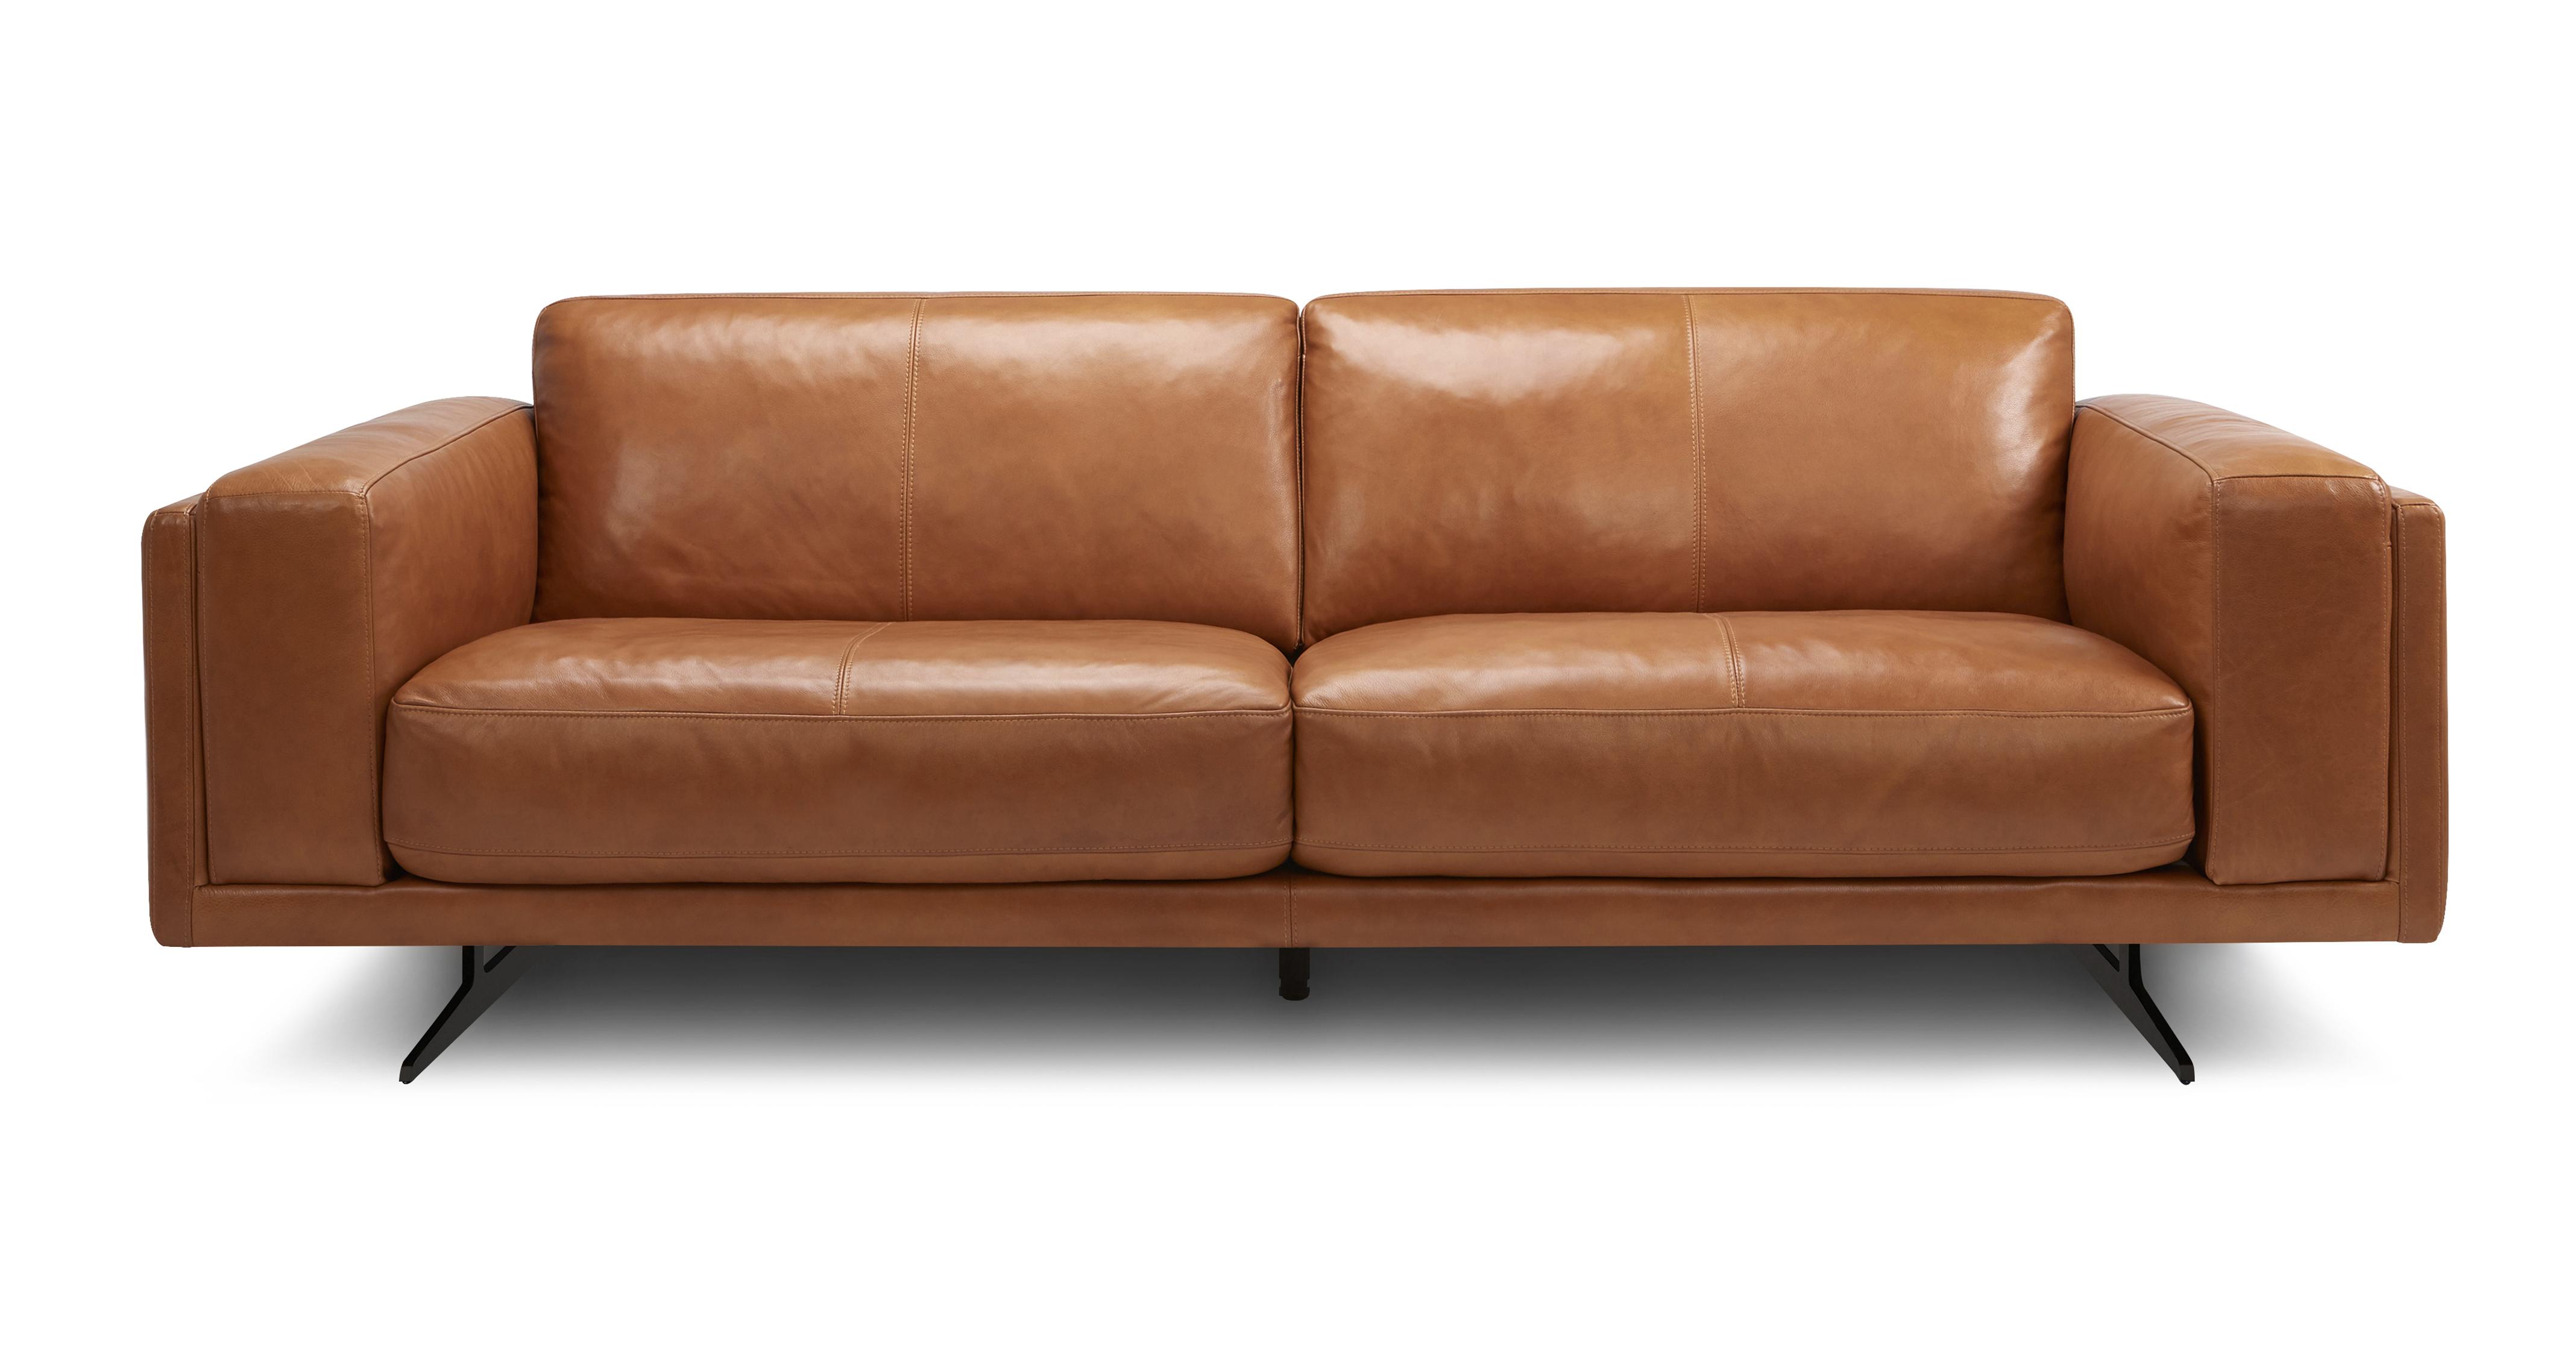 Ney 3 Seater Sofa Palatial Dfs, French Leather Sofa